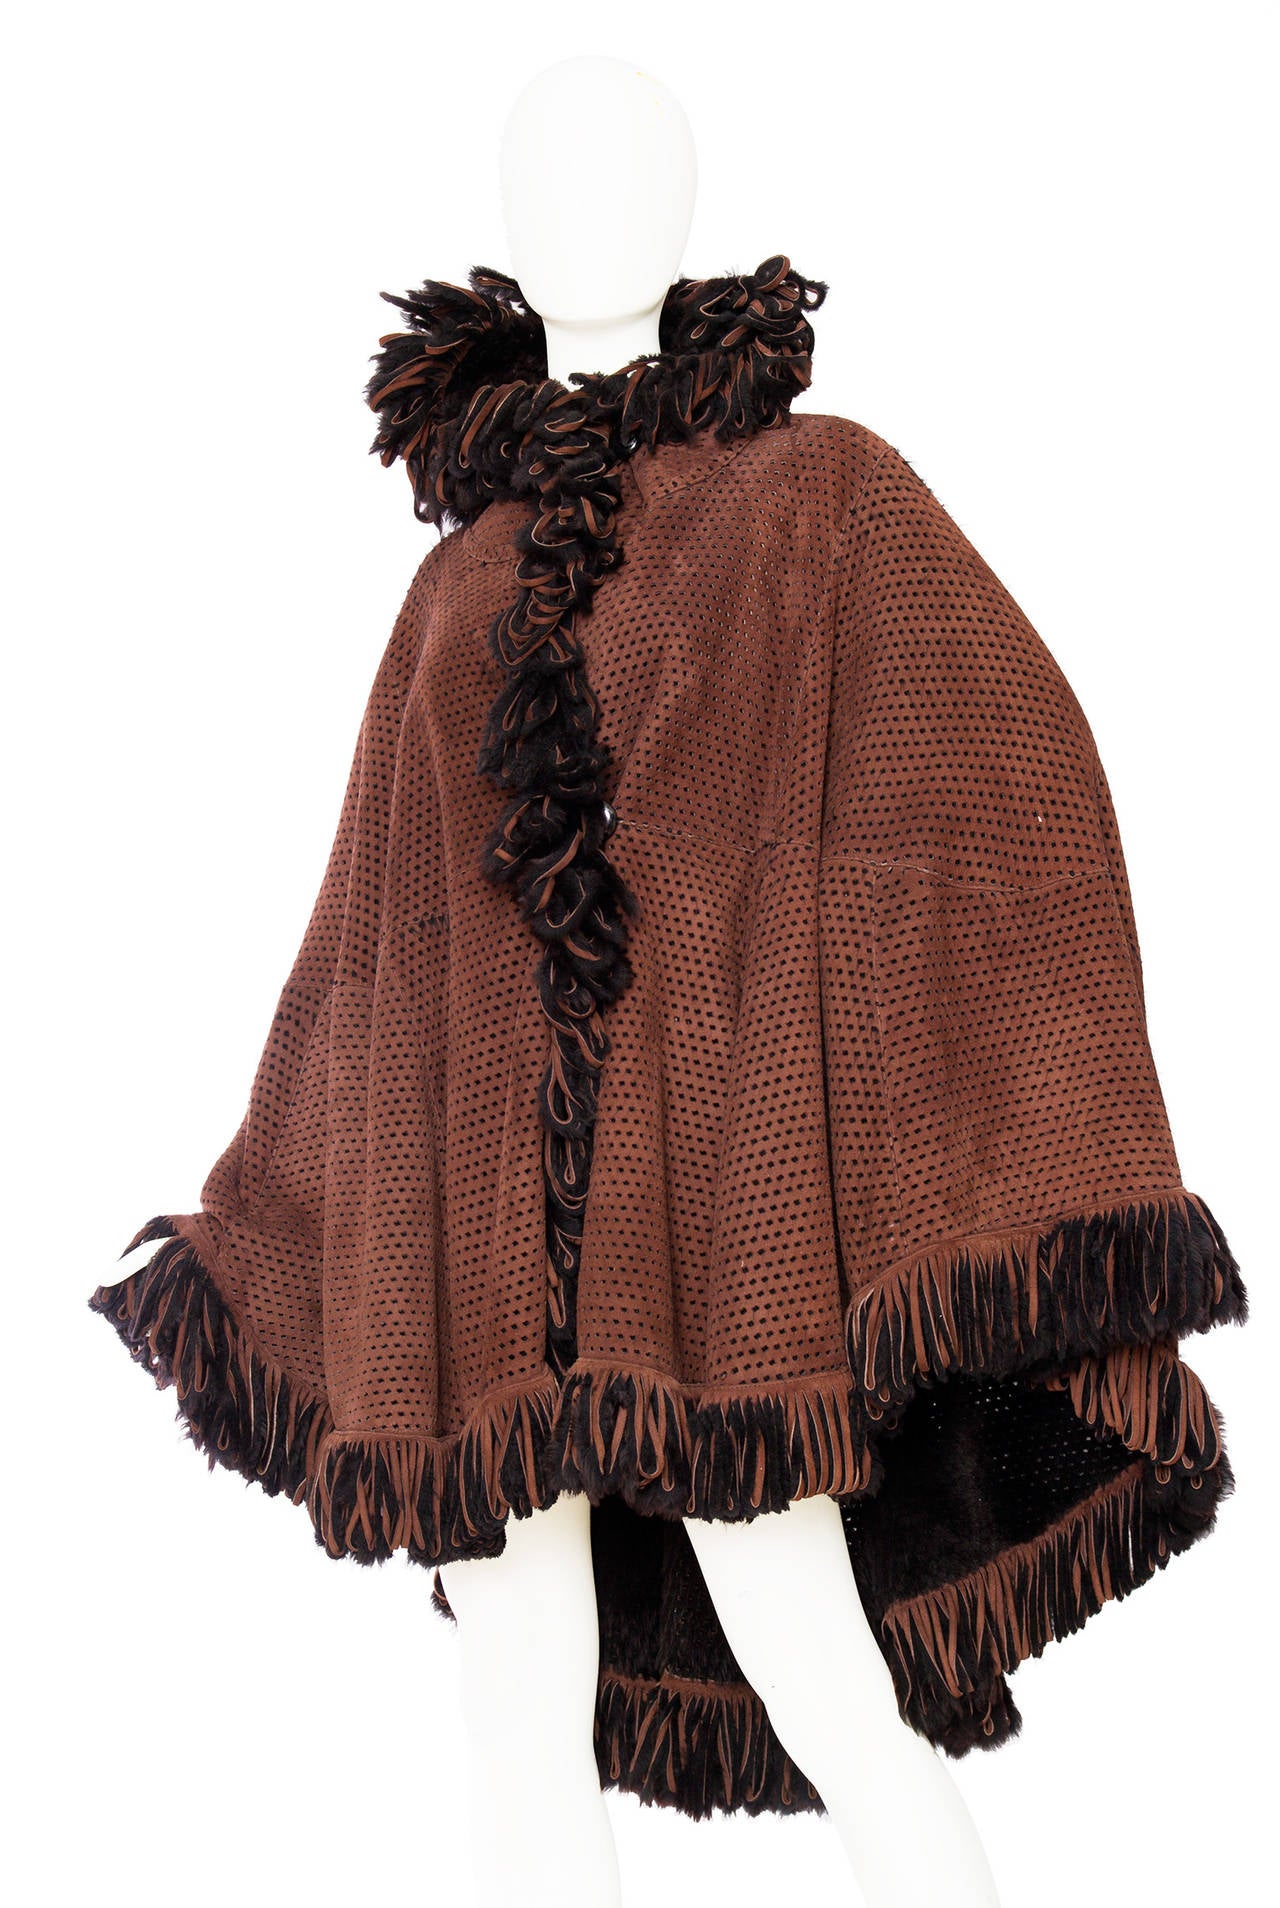 A 1980s brown and black Fendi perforated shearling hooded cape with fringe trim detailing around the hemline and down the front. The cape has front button closure on the top and has a round hemline that falls lower on the back. 

The size of the